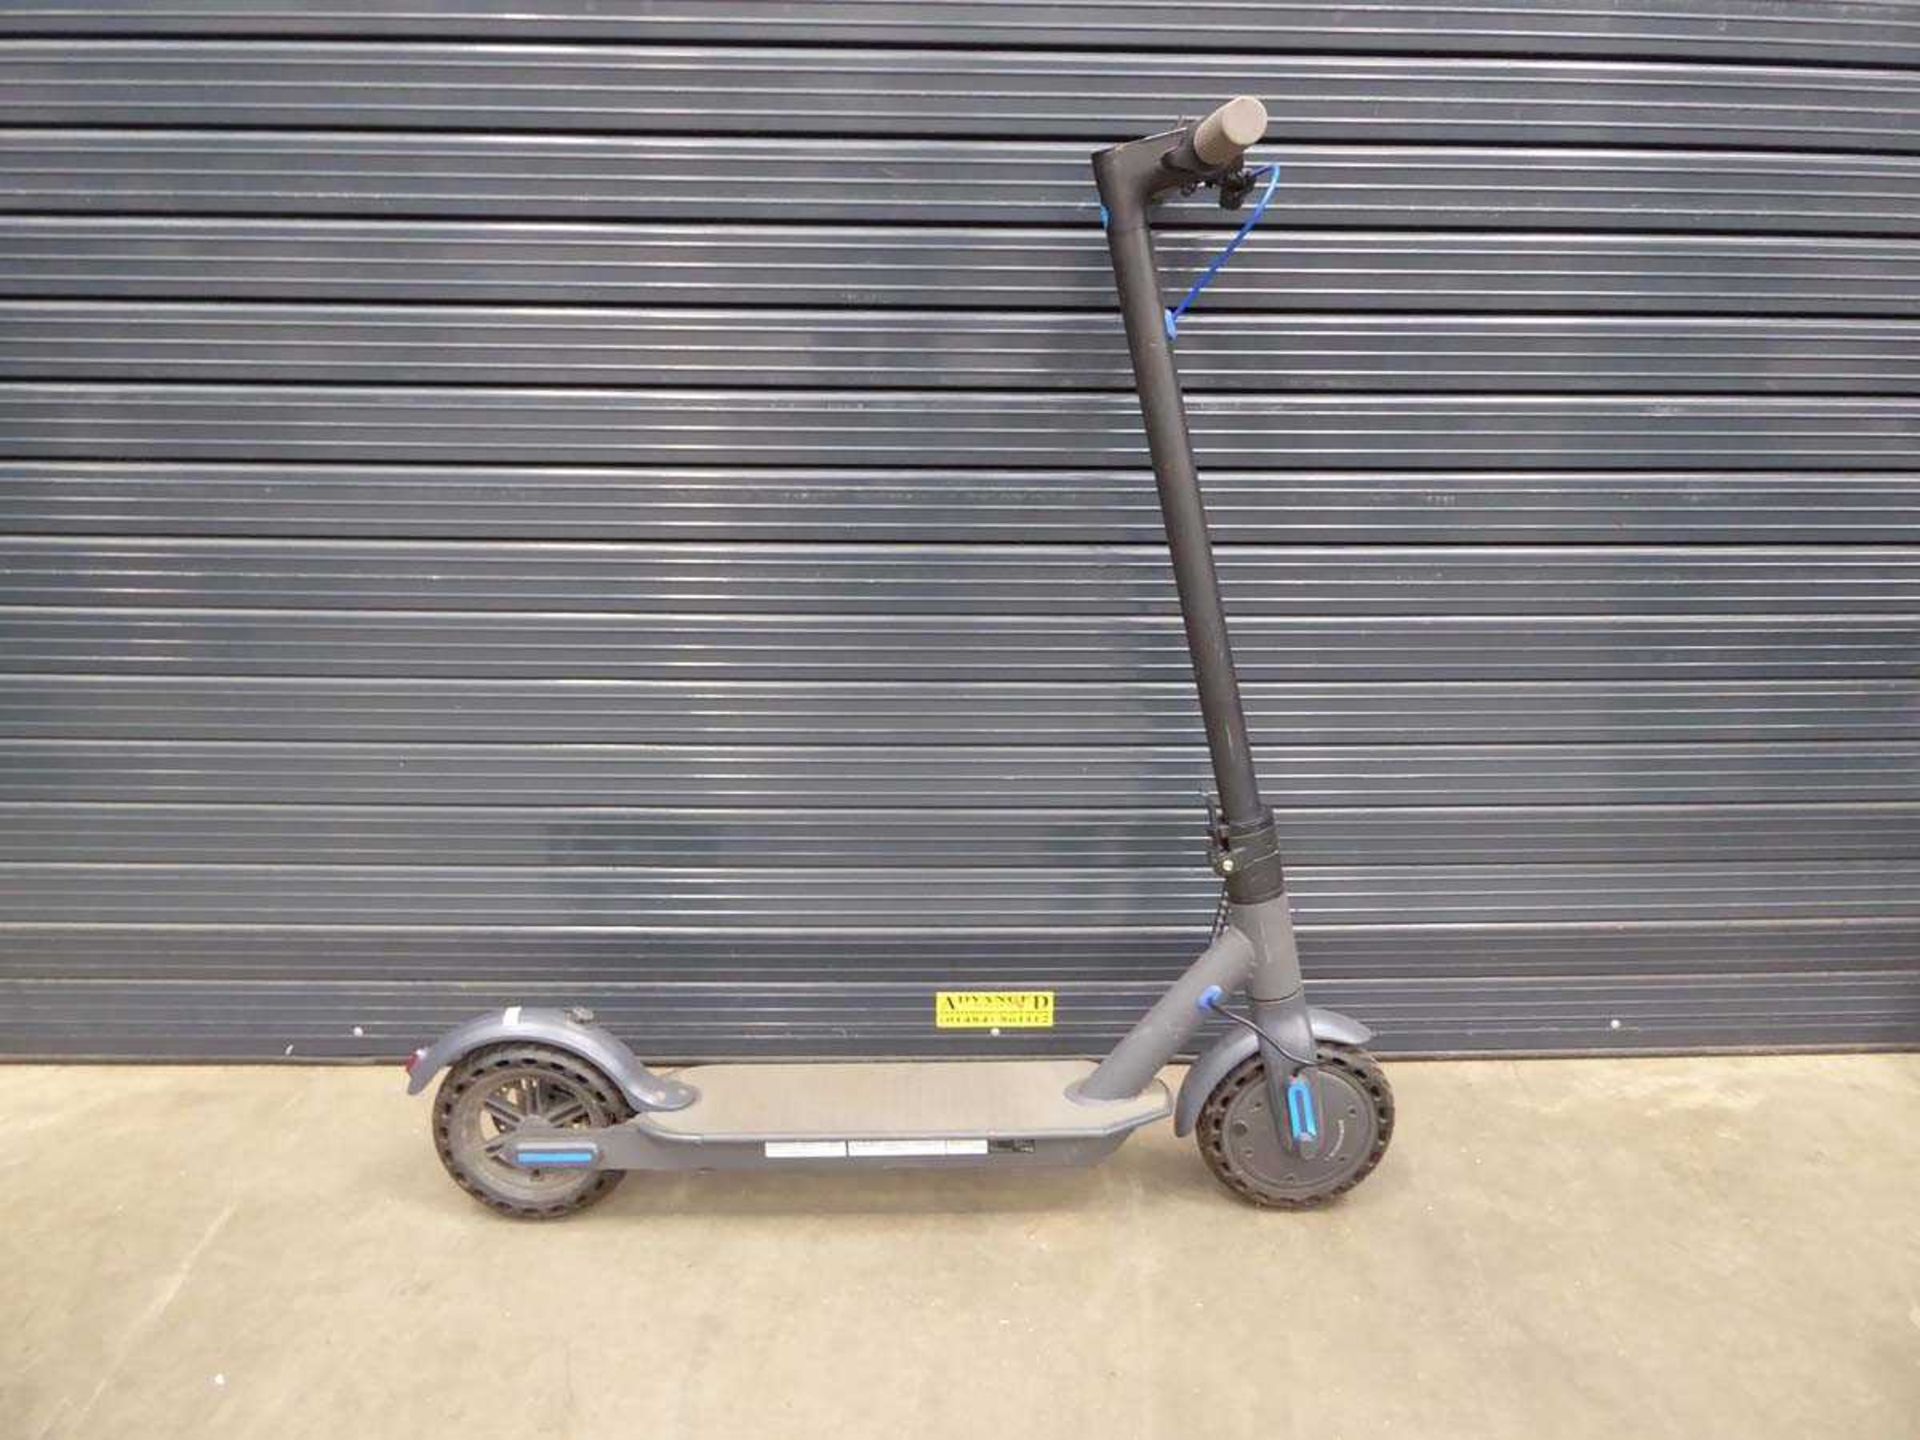 Grey electric scooter, no charger